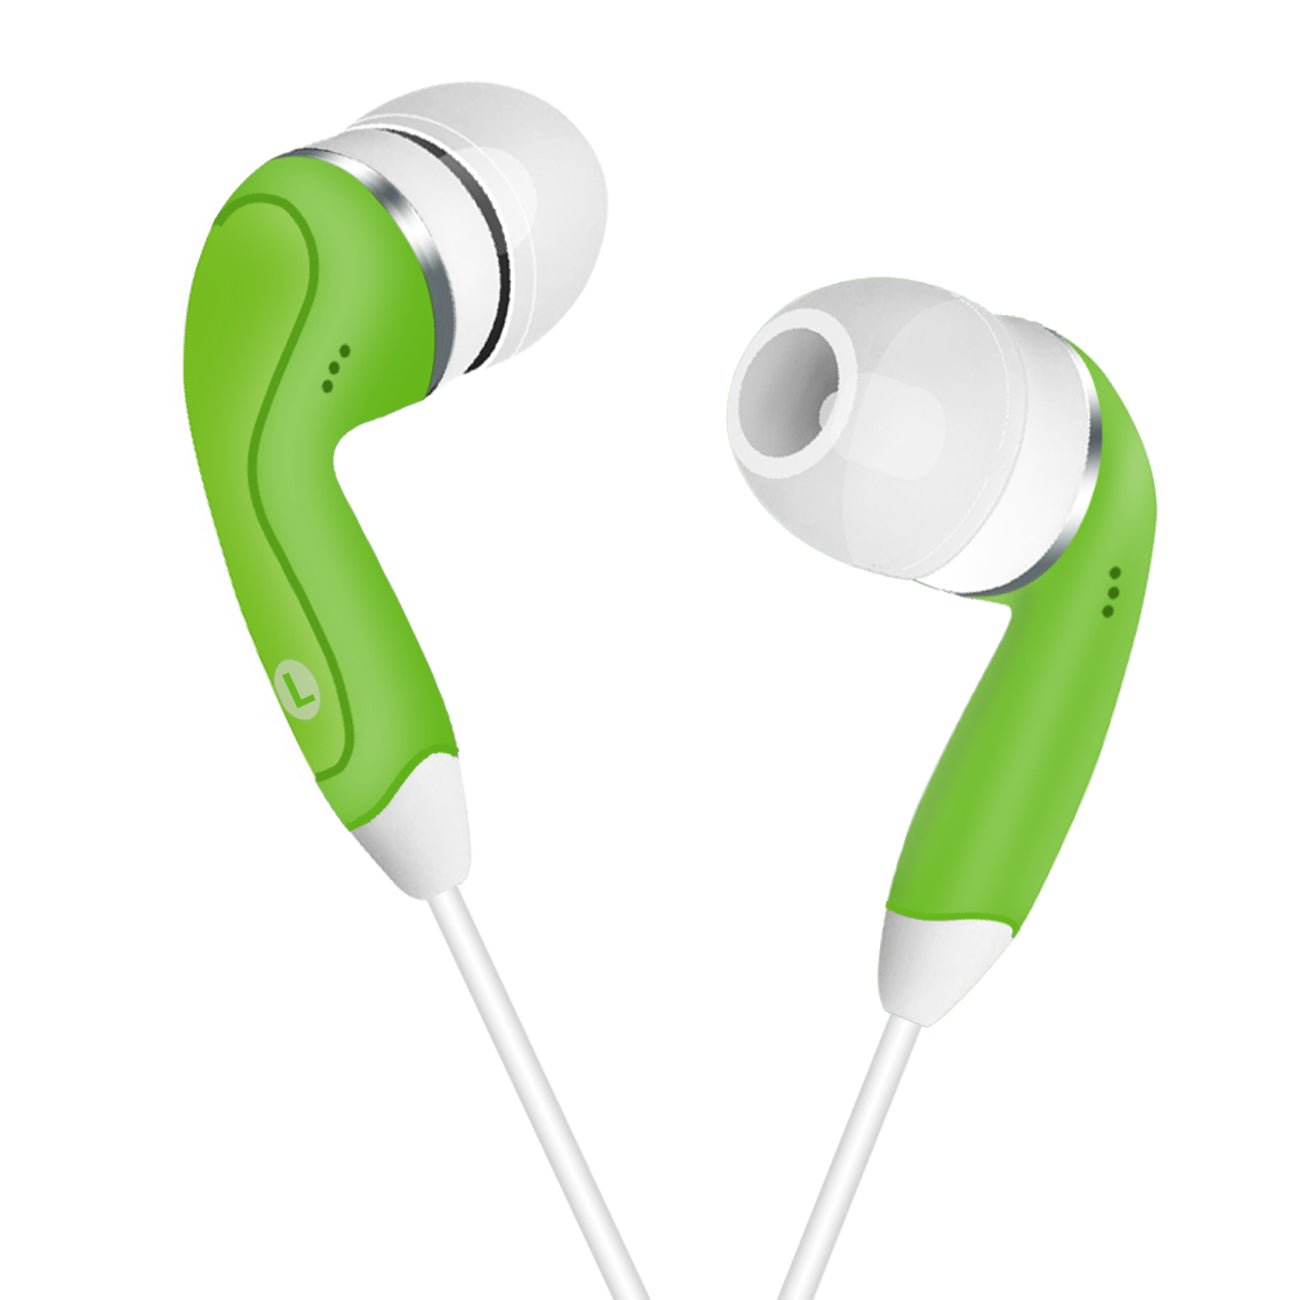 Headphones In-Ear With Mic Reiko Green Color